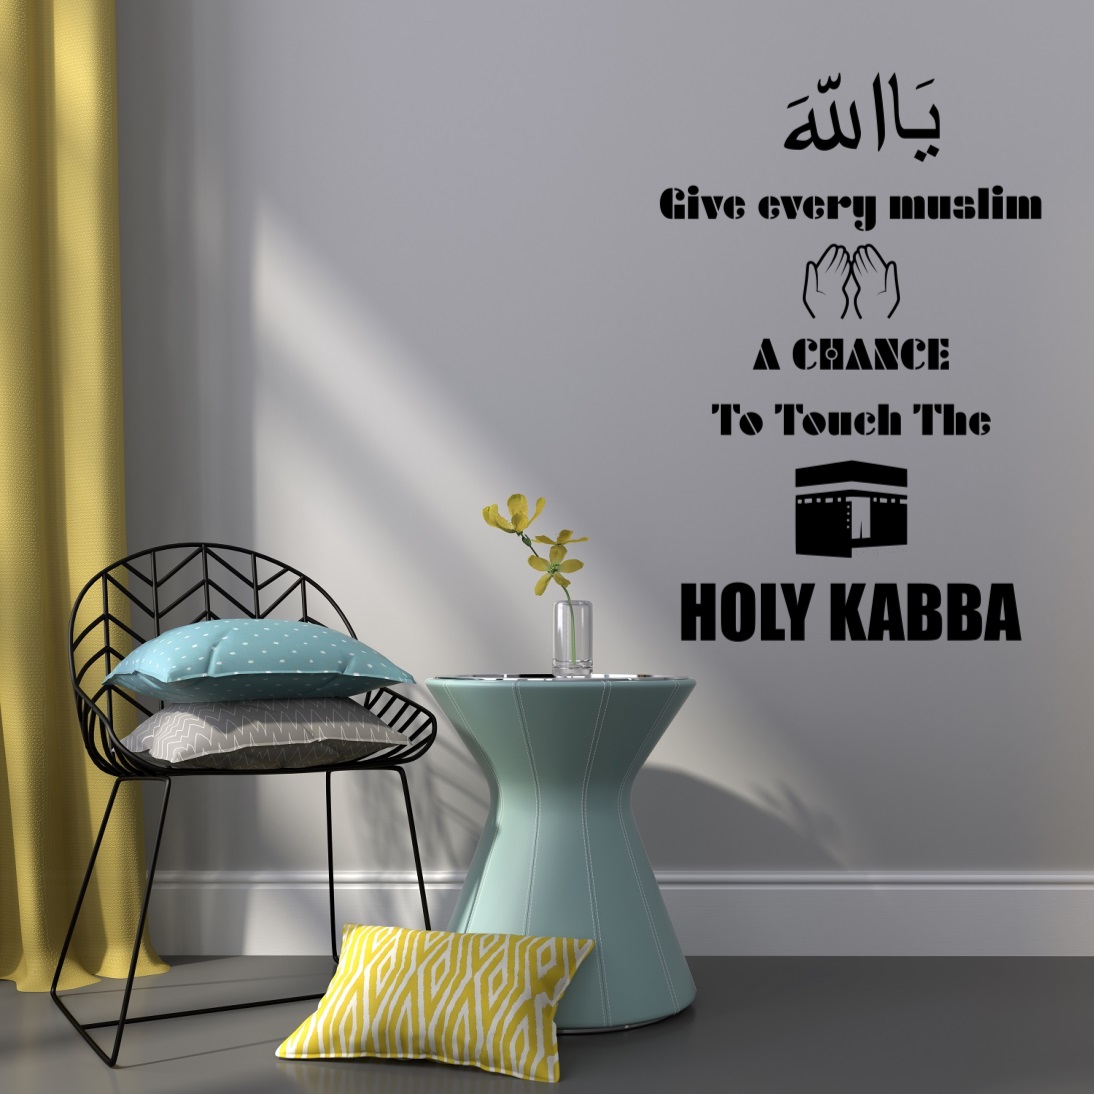 Ya Allah - Give us a Chance to Offer Hajj - Ameen - Islamic Wall Decal